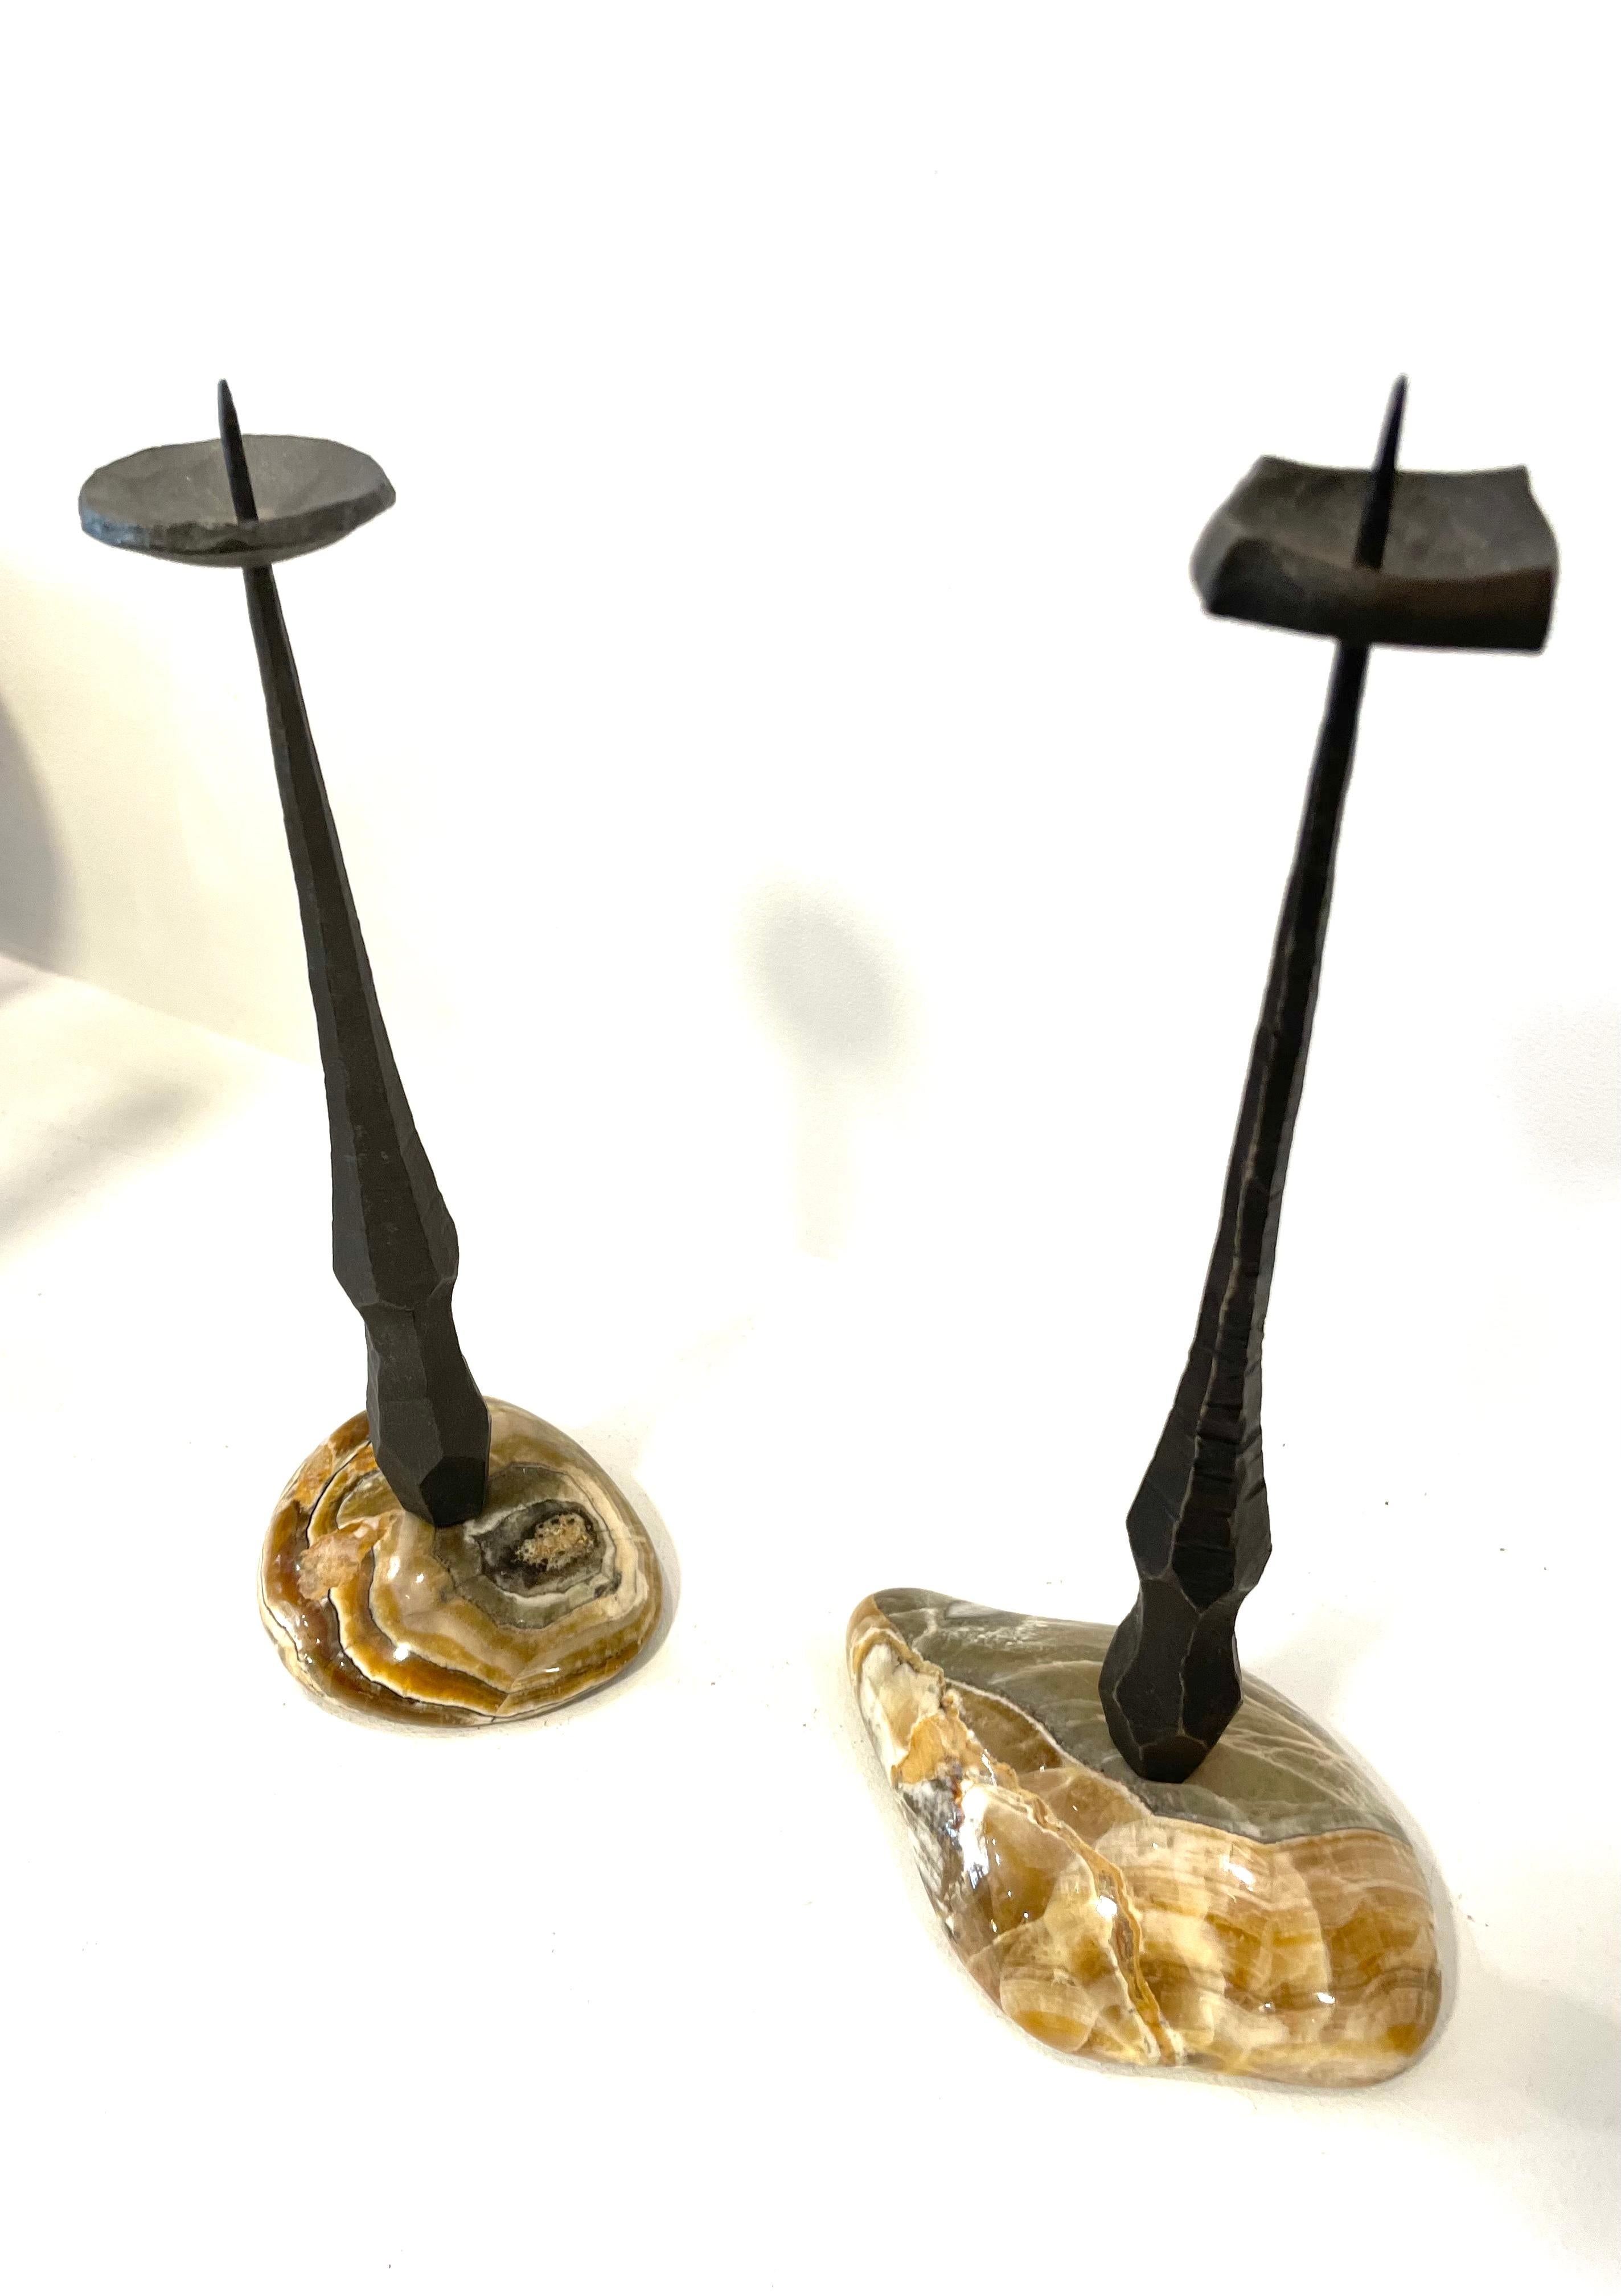 Iron Mid-20th Century Israeli Brutalist Candlesticks by David Palombo For Sale